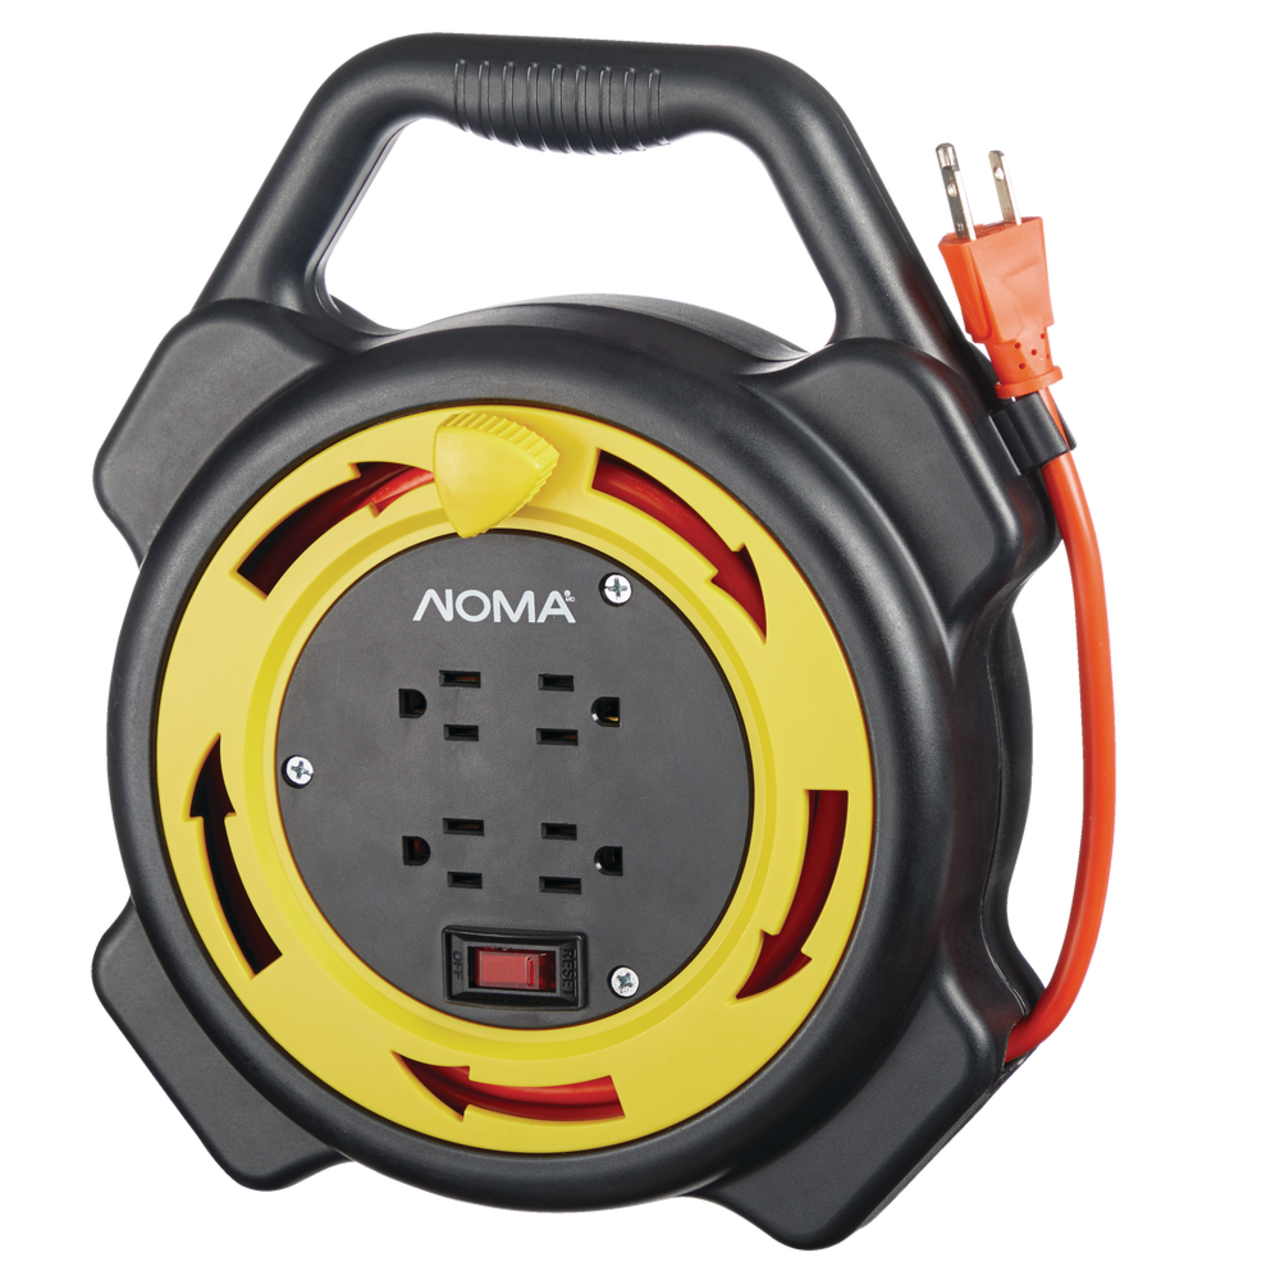 NOMA 25-ft 16/3 Extension Cord with Storage Reel, 4 Grounded